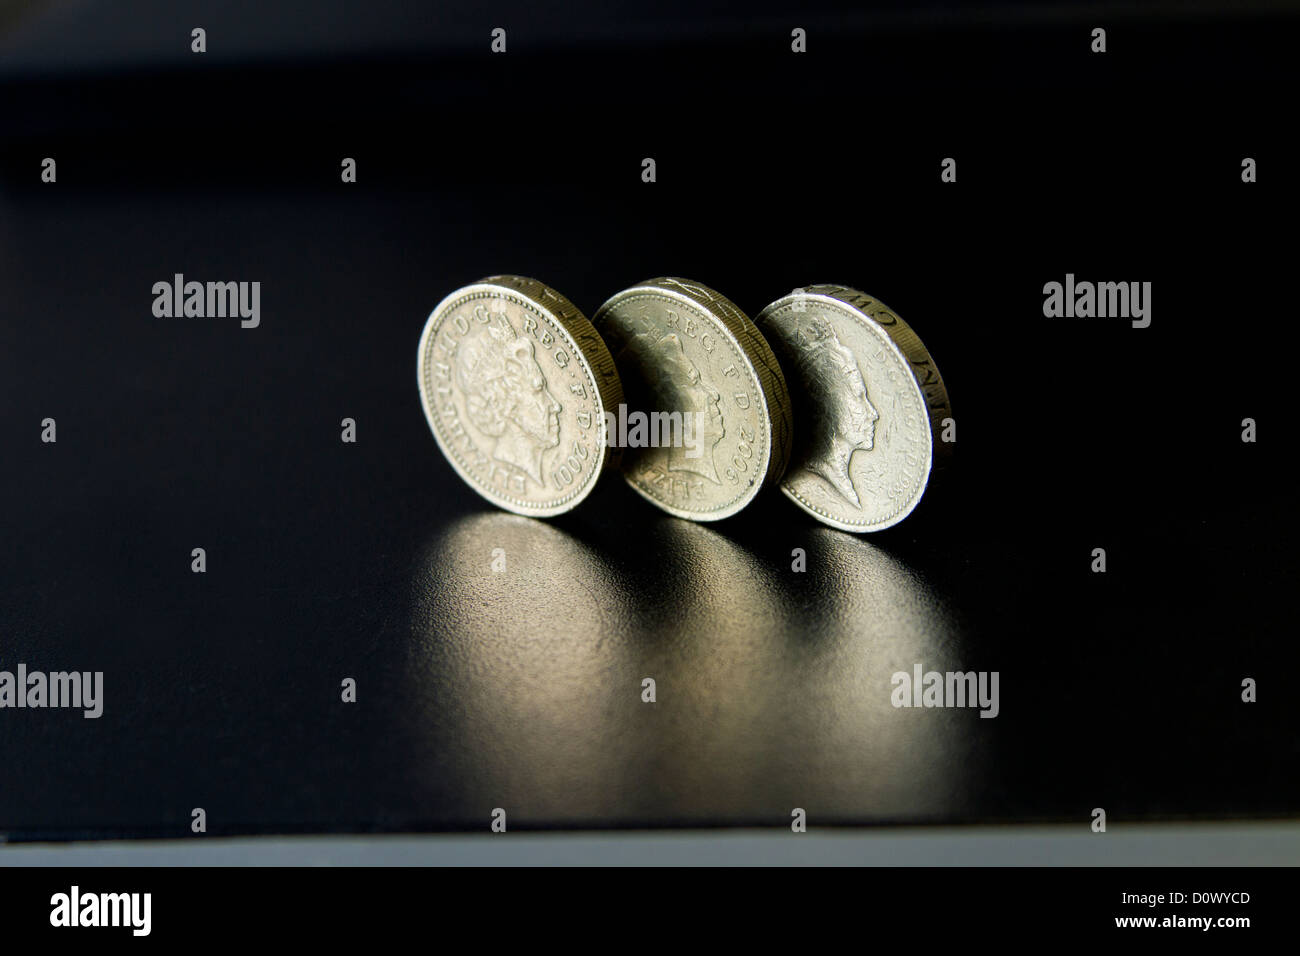 Pound sterling coin three coins shiny casting shadow on reflective black surface on table desk for banking and financial services Stock Photo